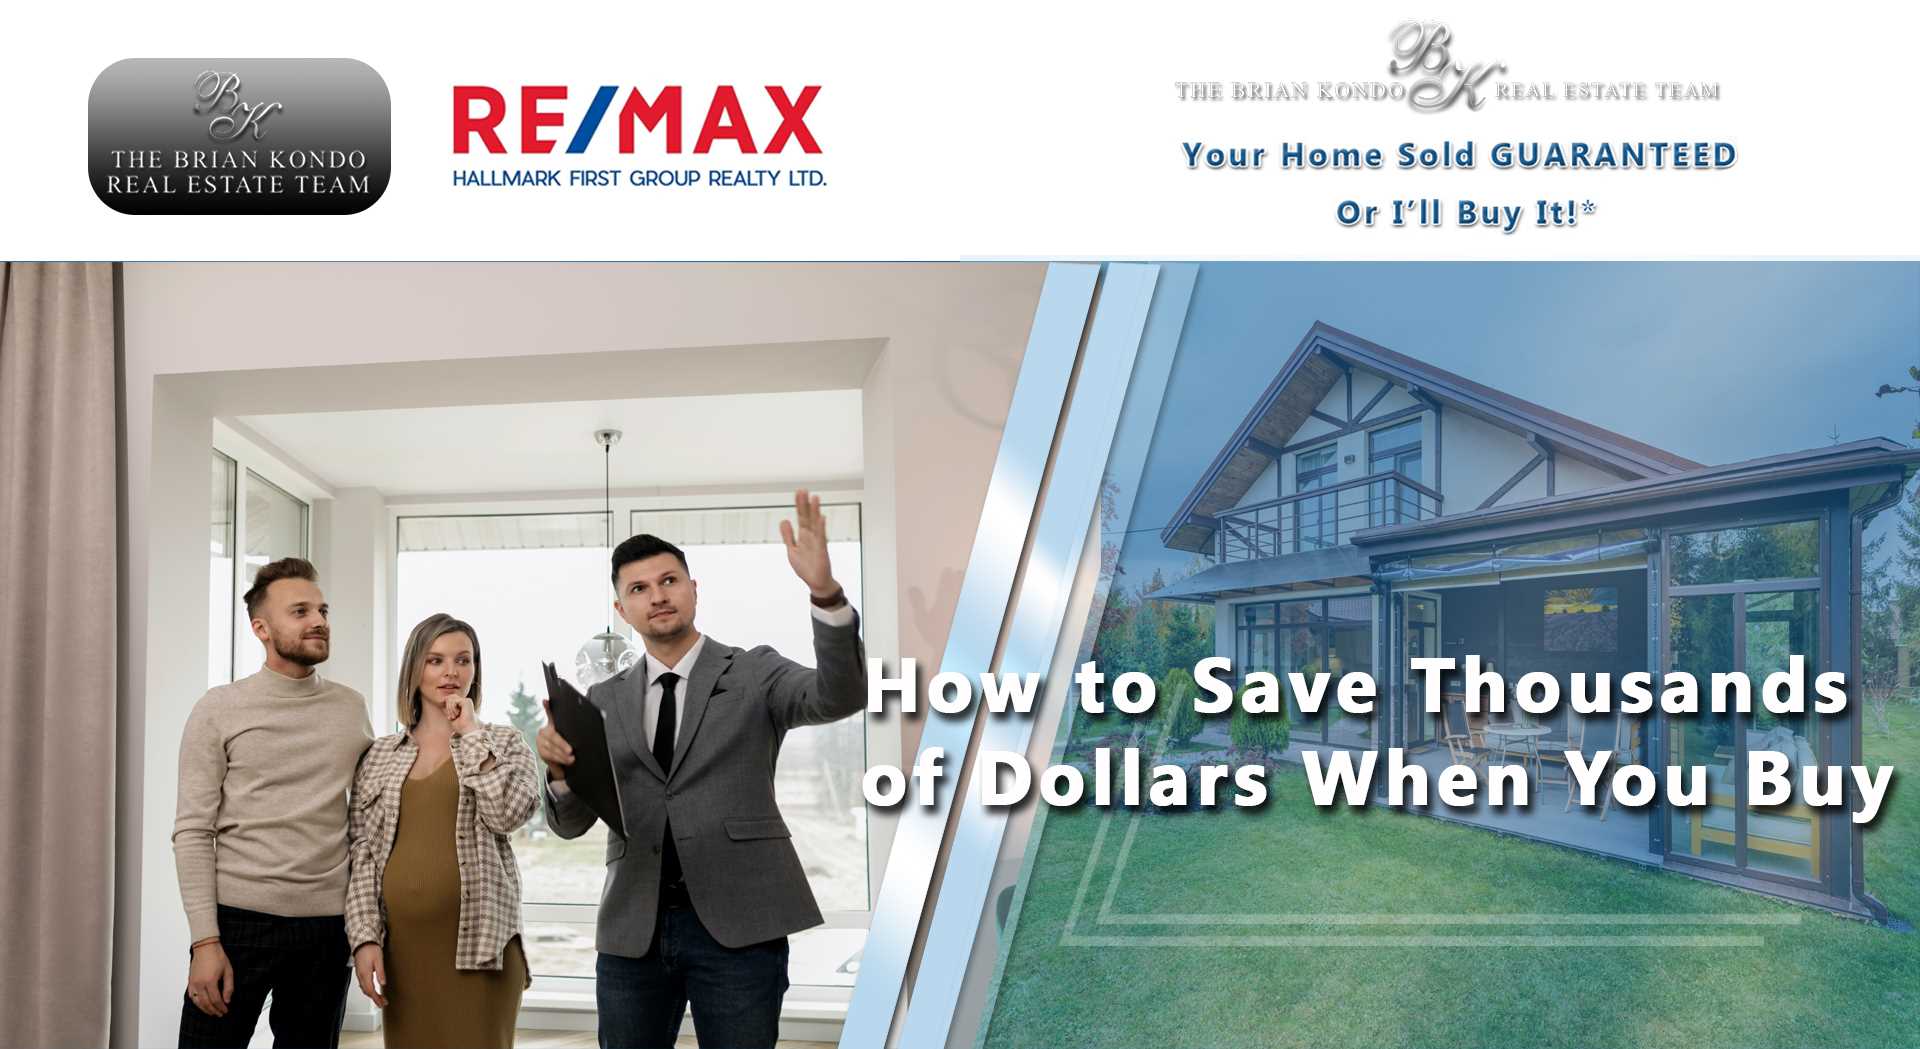 HOMEBUYERS: How to Save Thousands of Dollars When You Buy